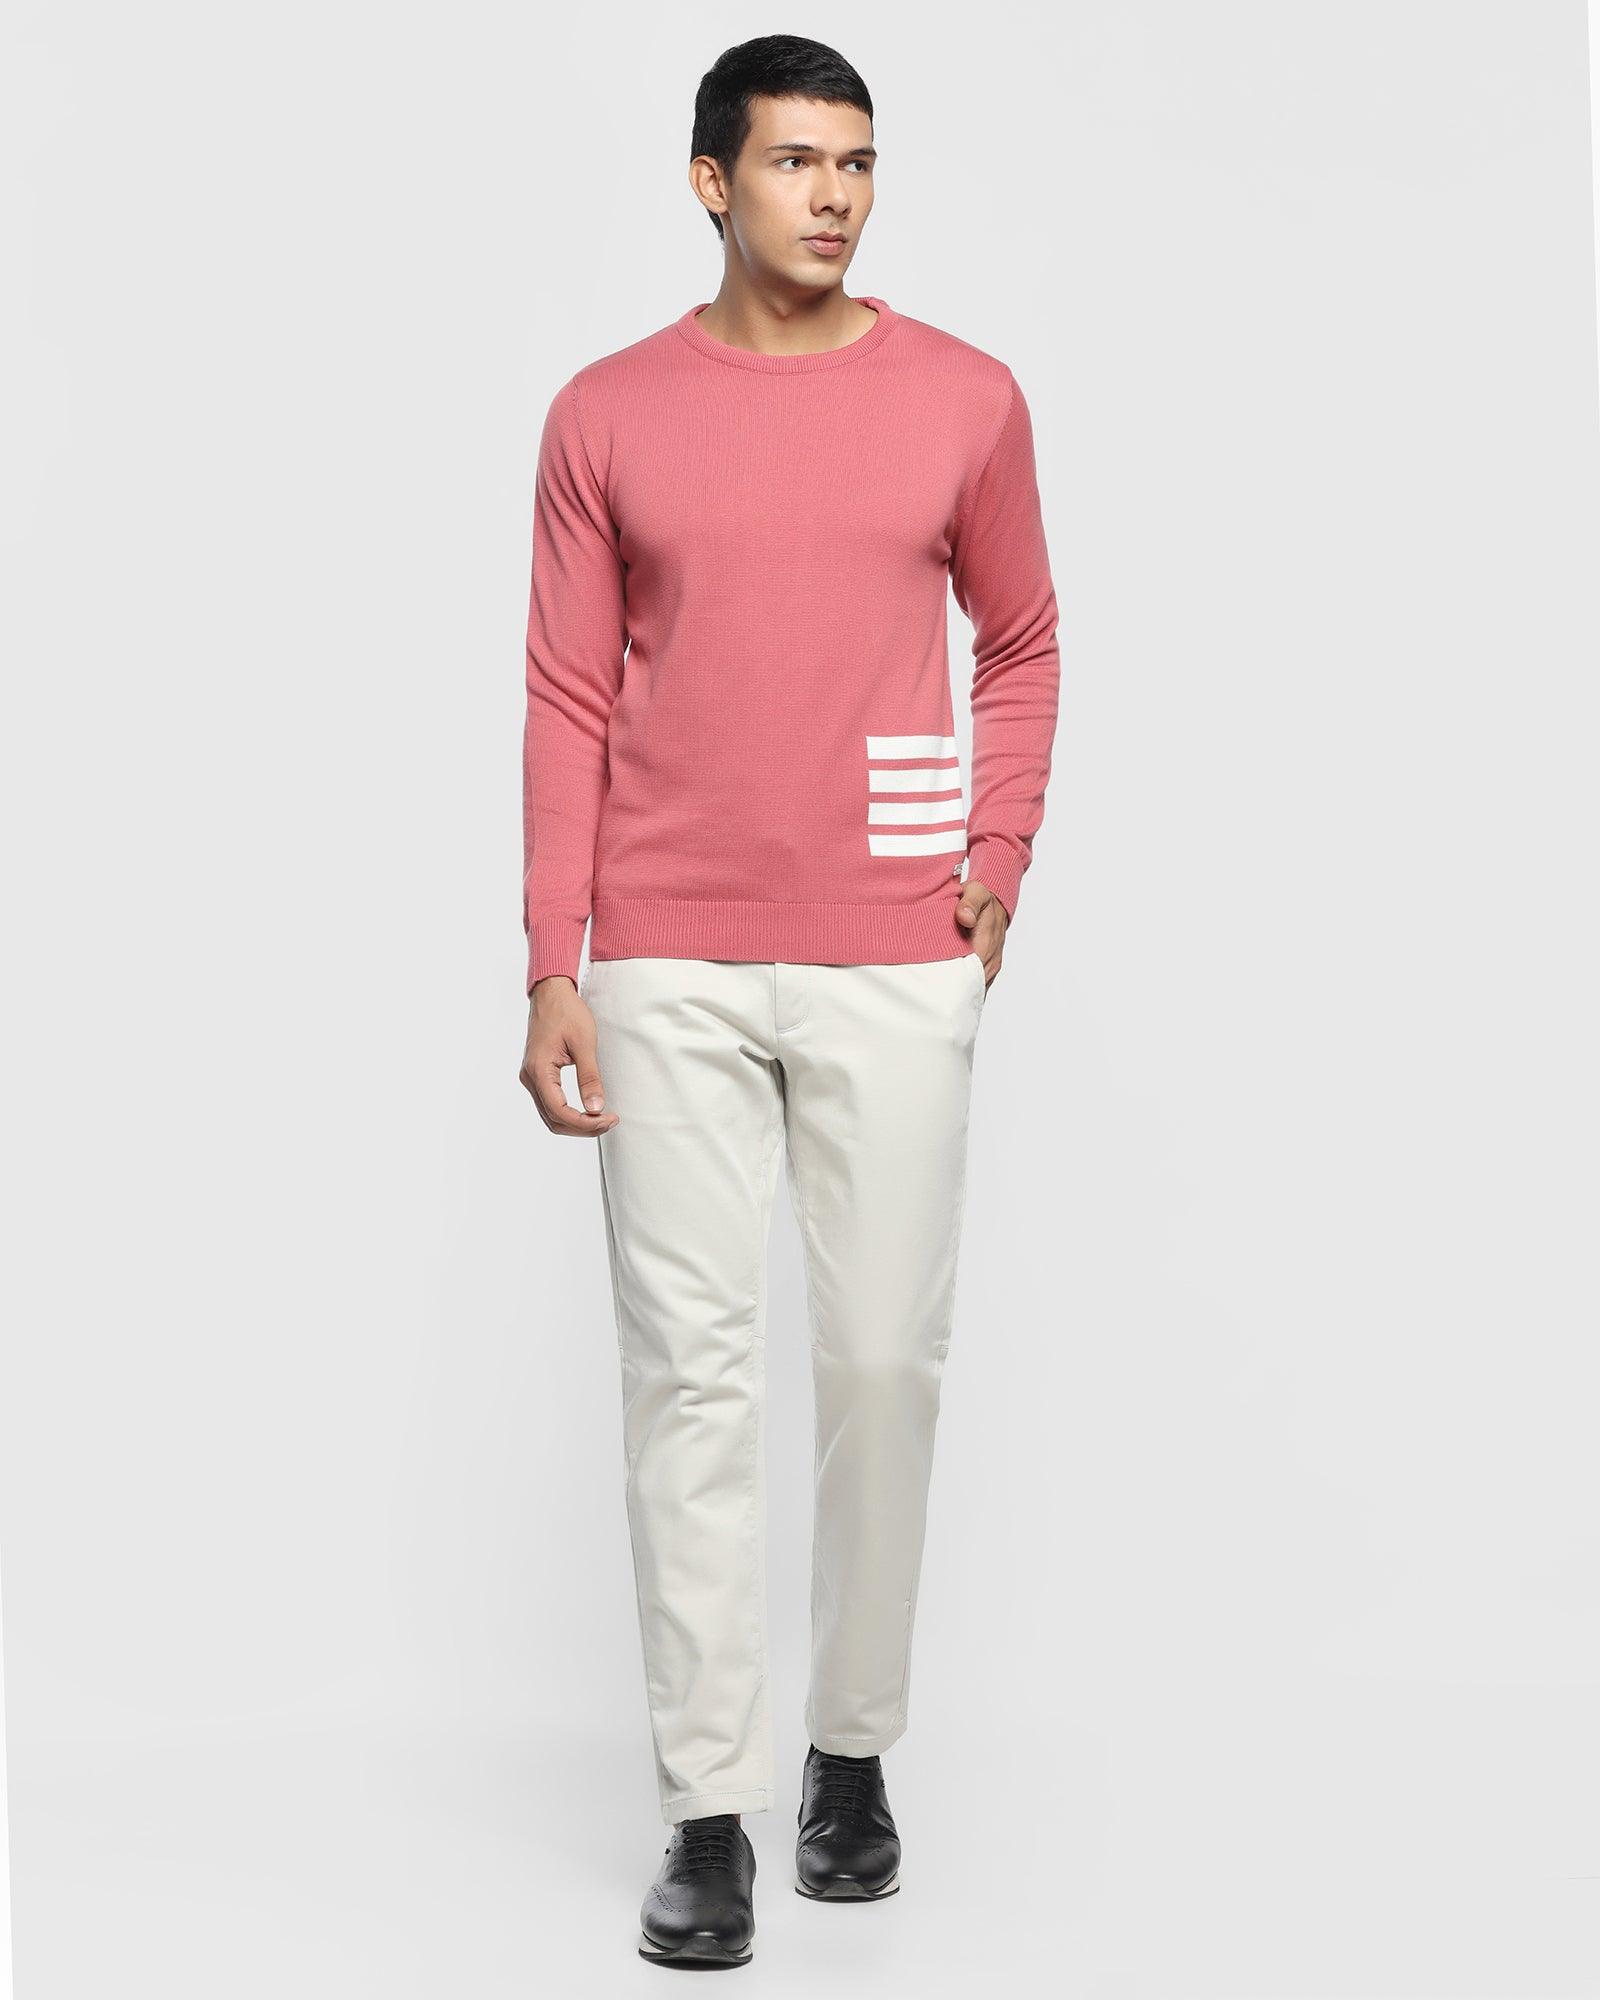 Crew Neck Dusty Pink Solid Sweater - Riddle